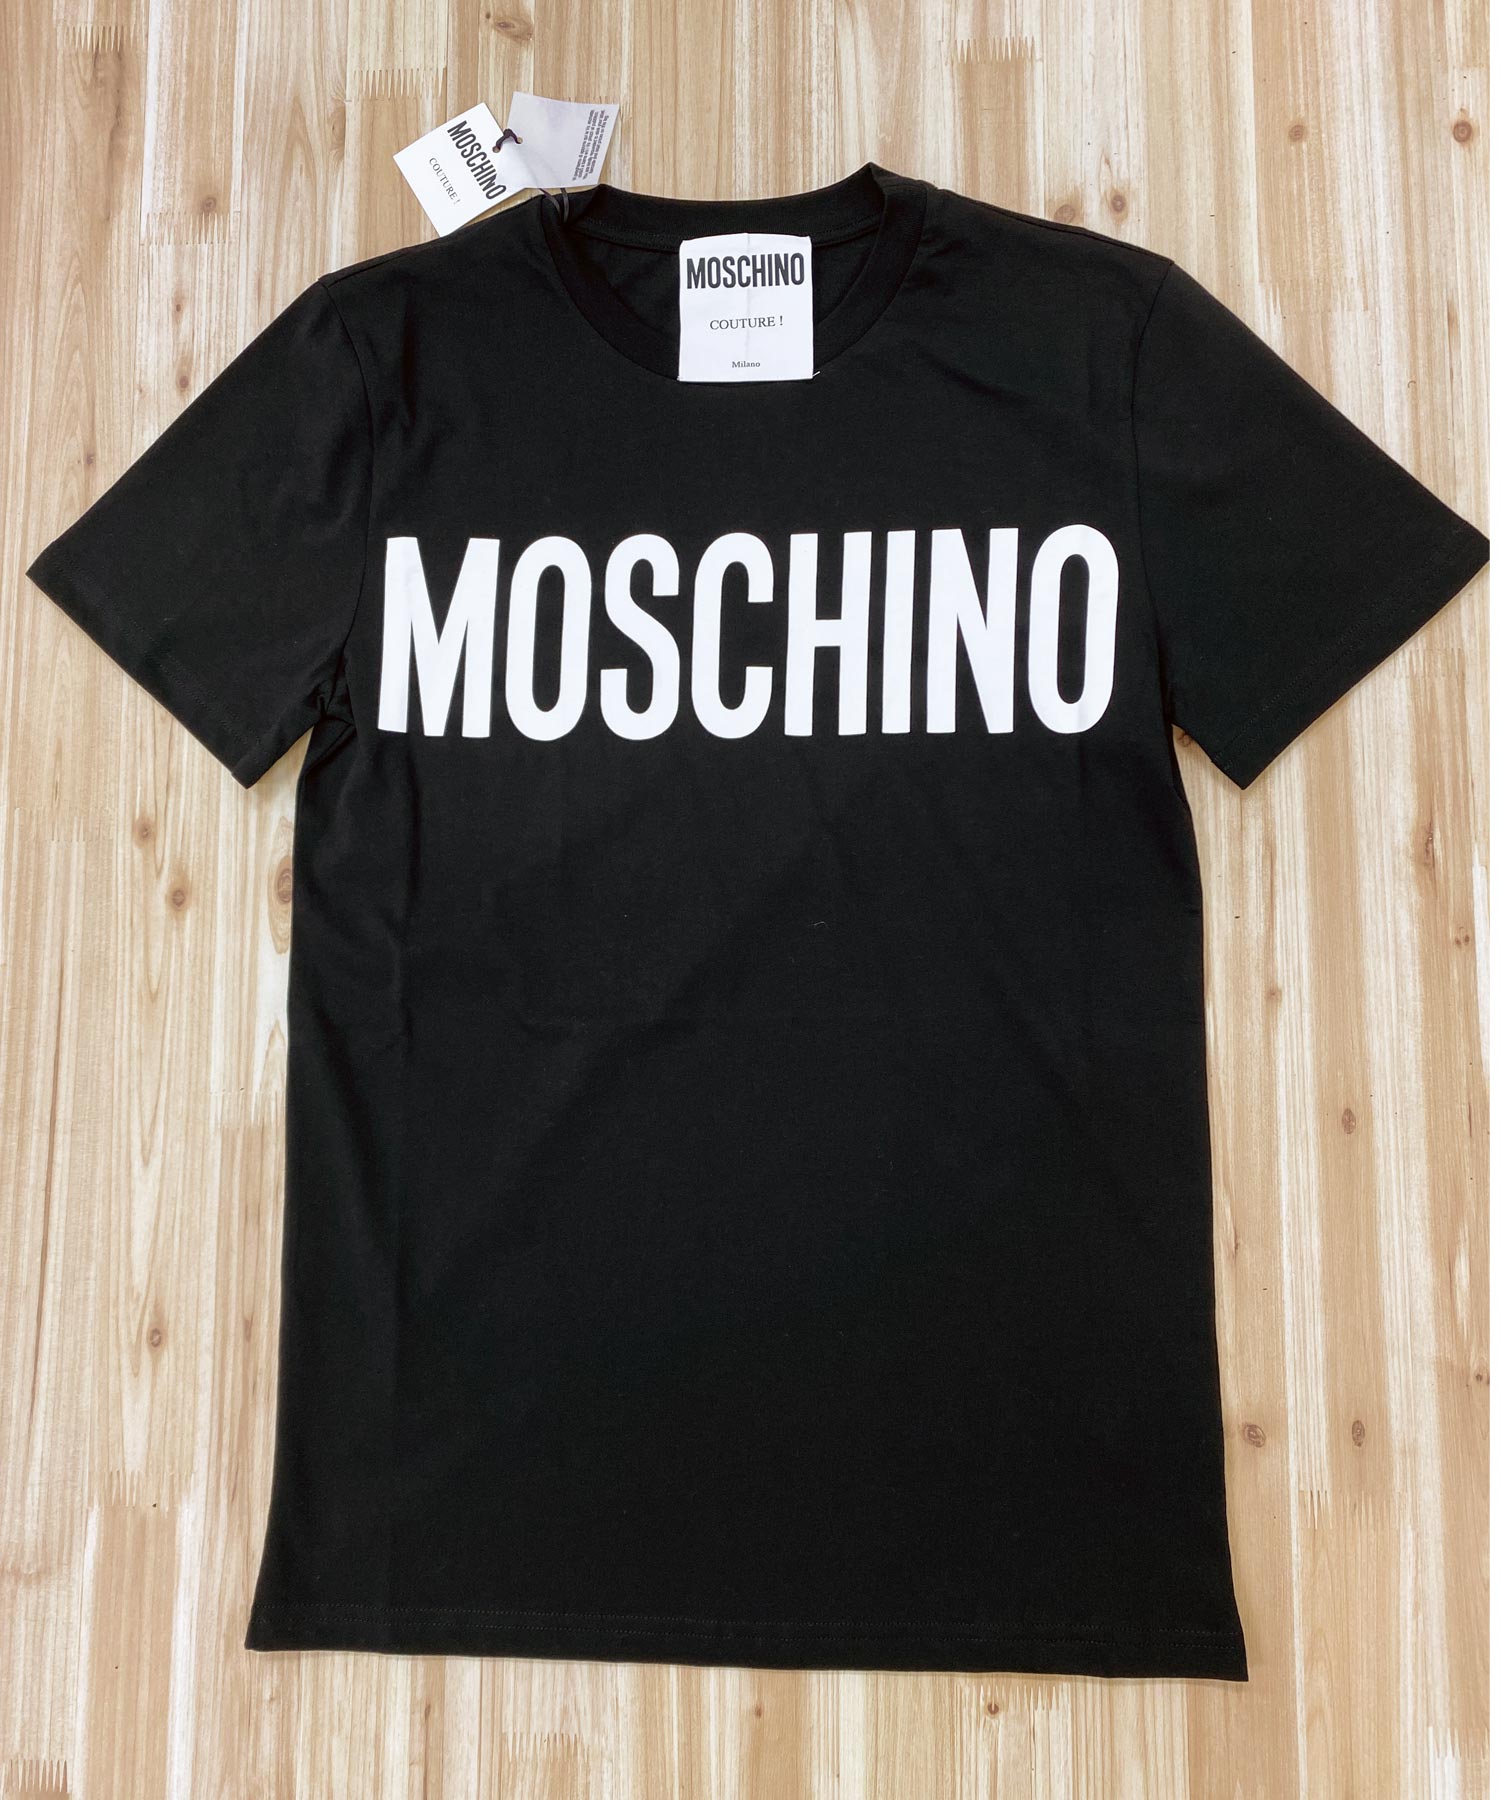 □48/ MOSCHINO COUTURE! モスキーノ ラバーロゴ Tシャツ - Tシャツ